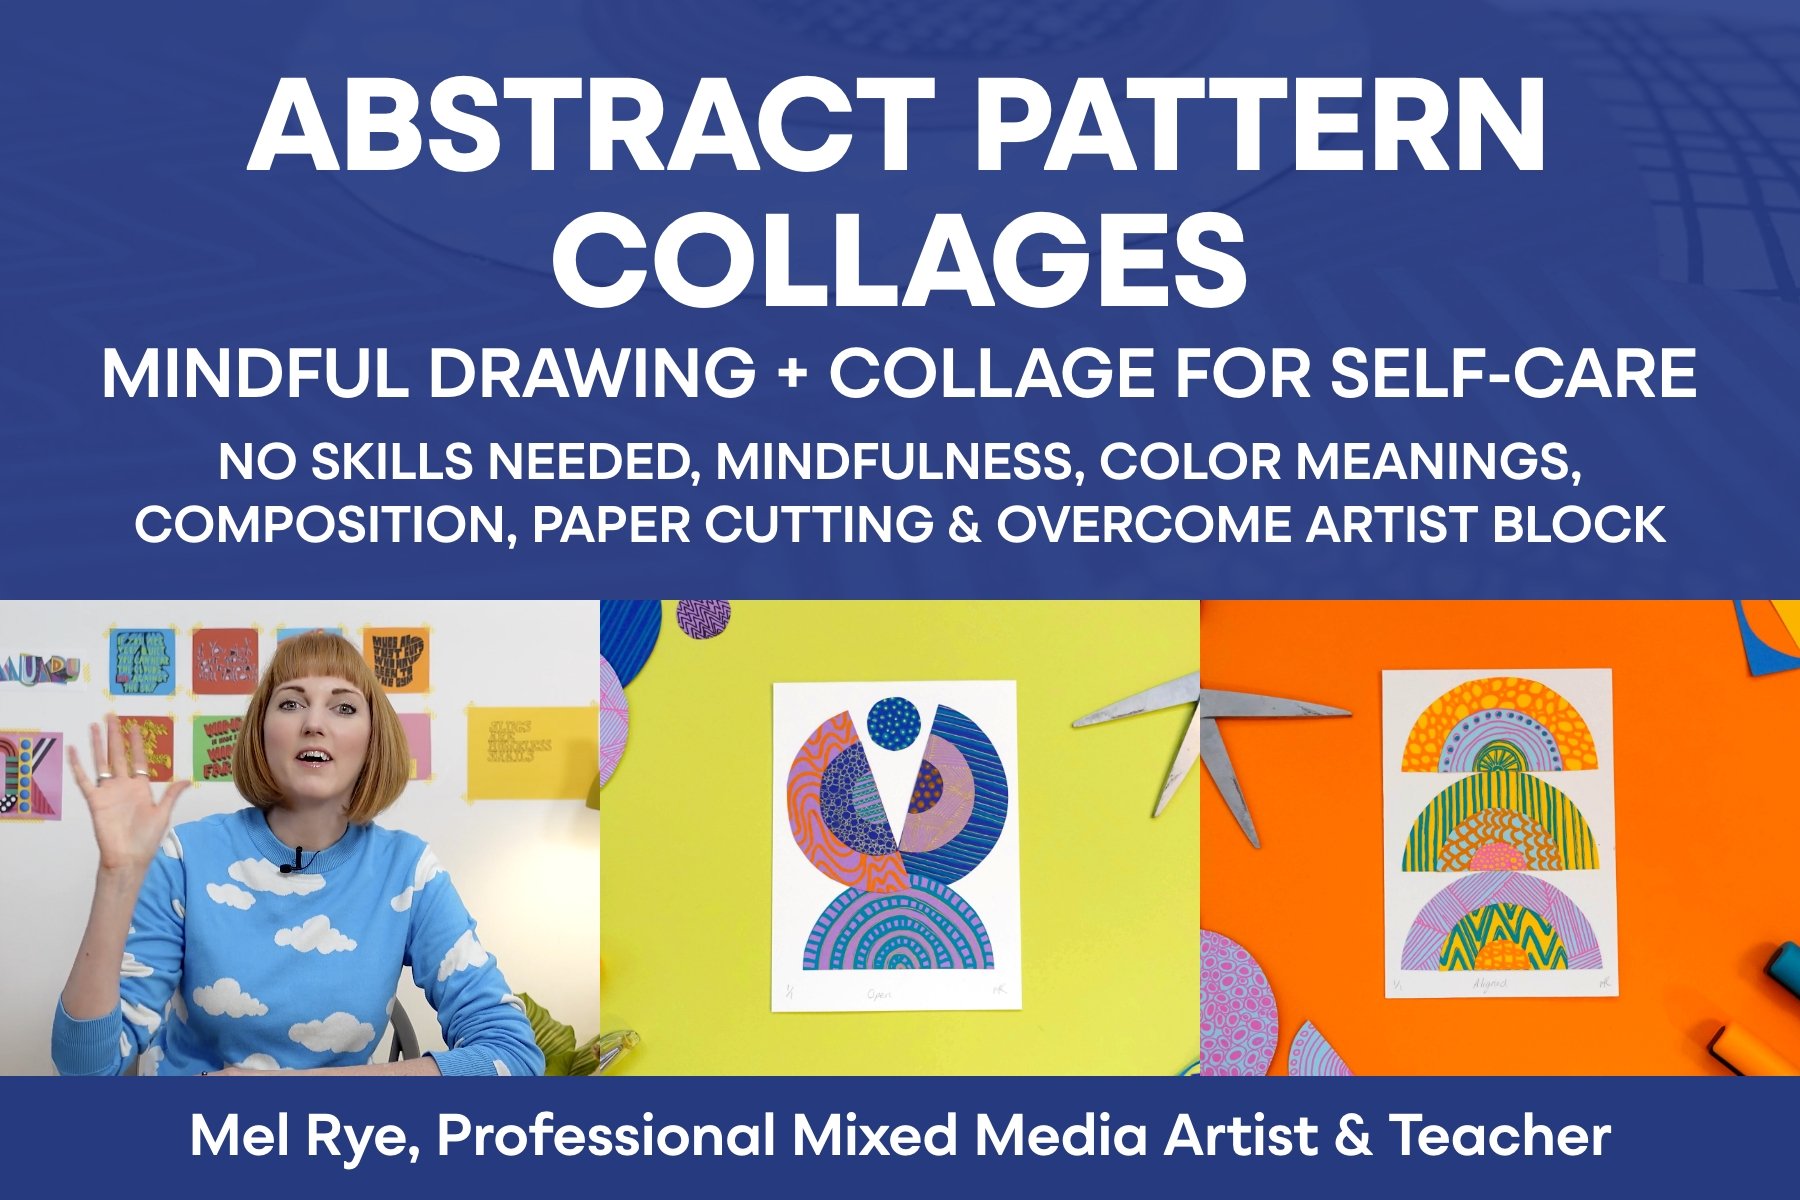 Abstract Pattern Collages: Mindful Drawing & Intuitive Collage for Self-Care